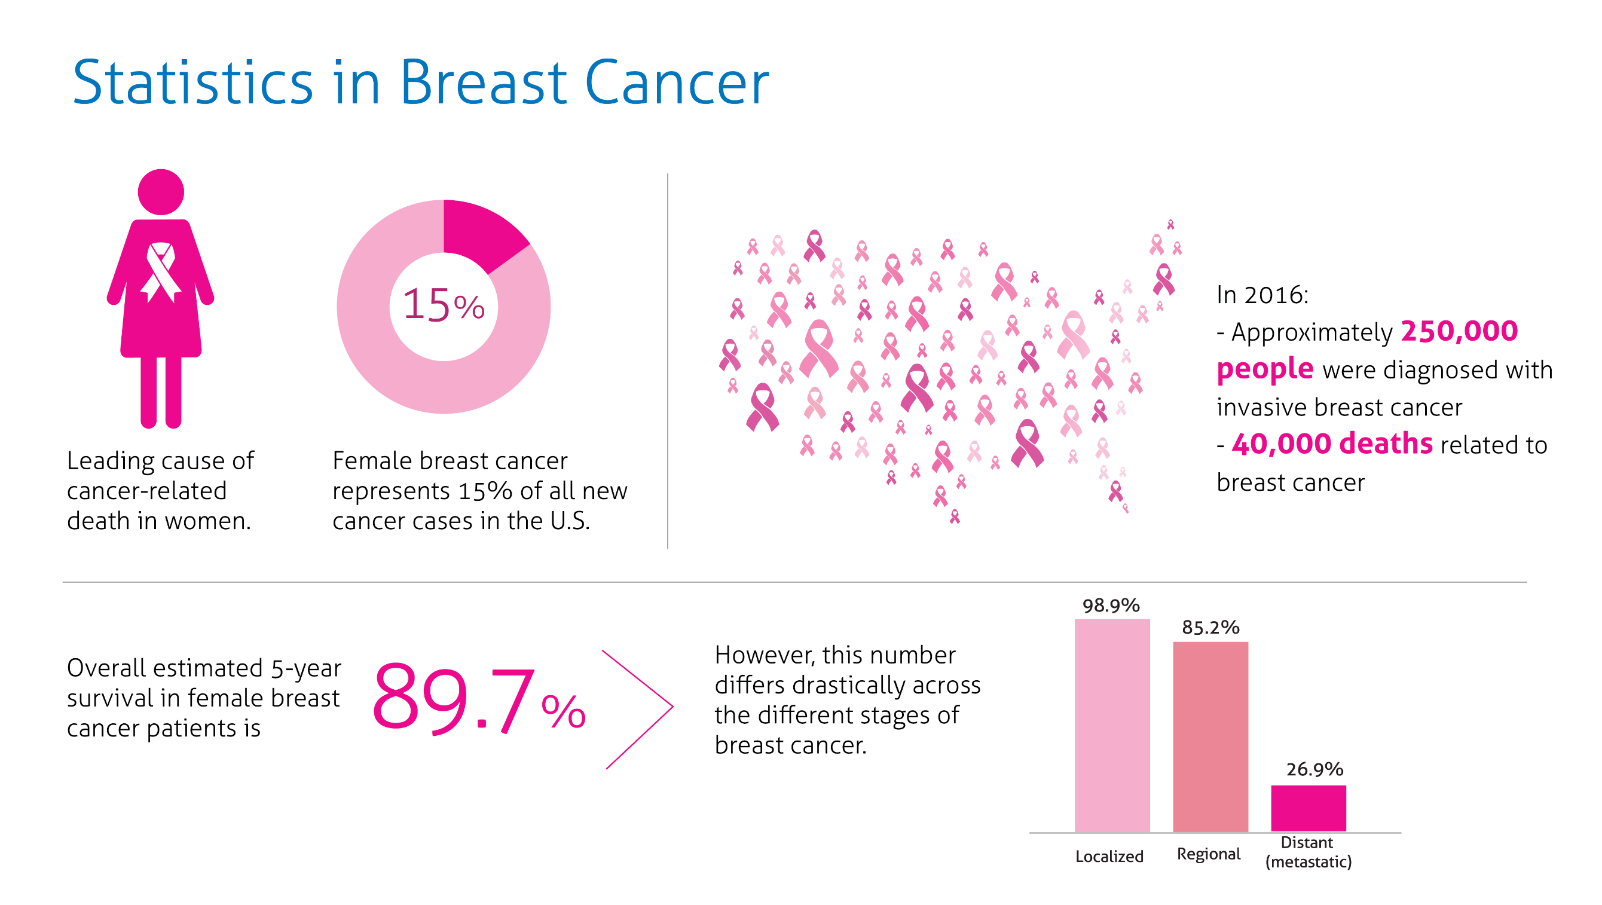 Breast Cancer Awareness Month: Statistics in Breast Cancer